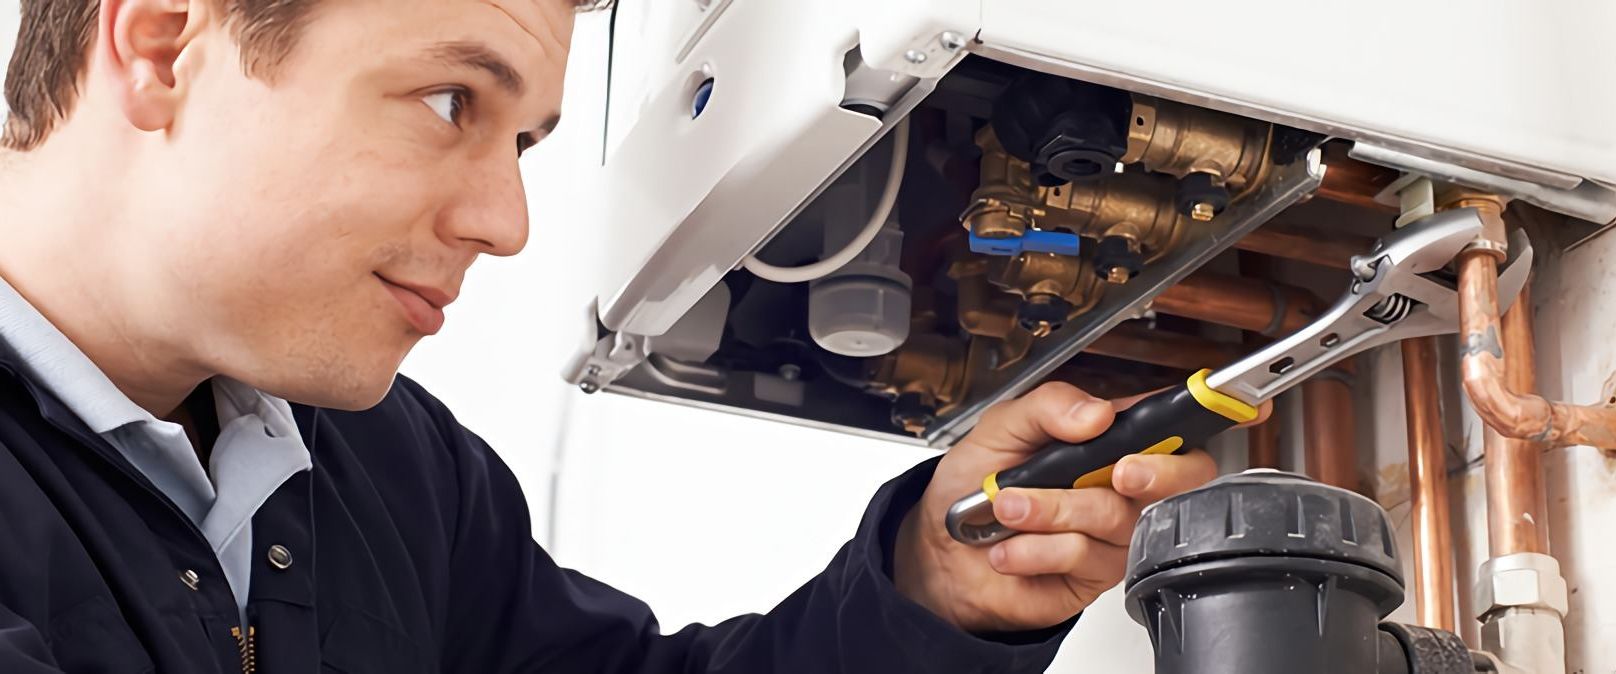 Why is Boiler Maintenance in your Home Important?